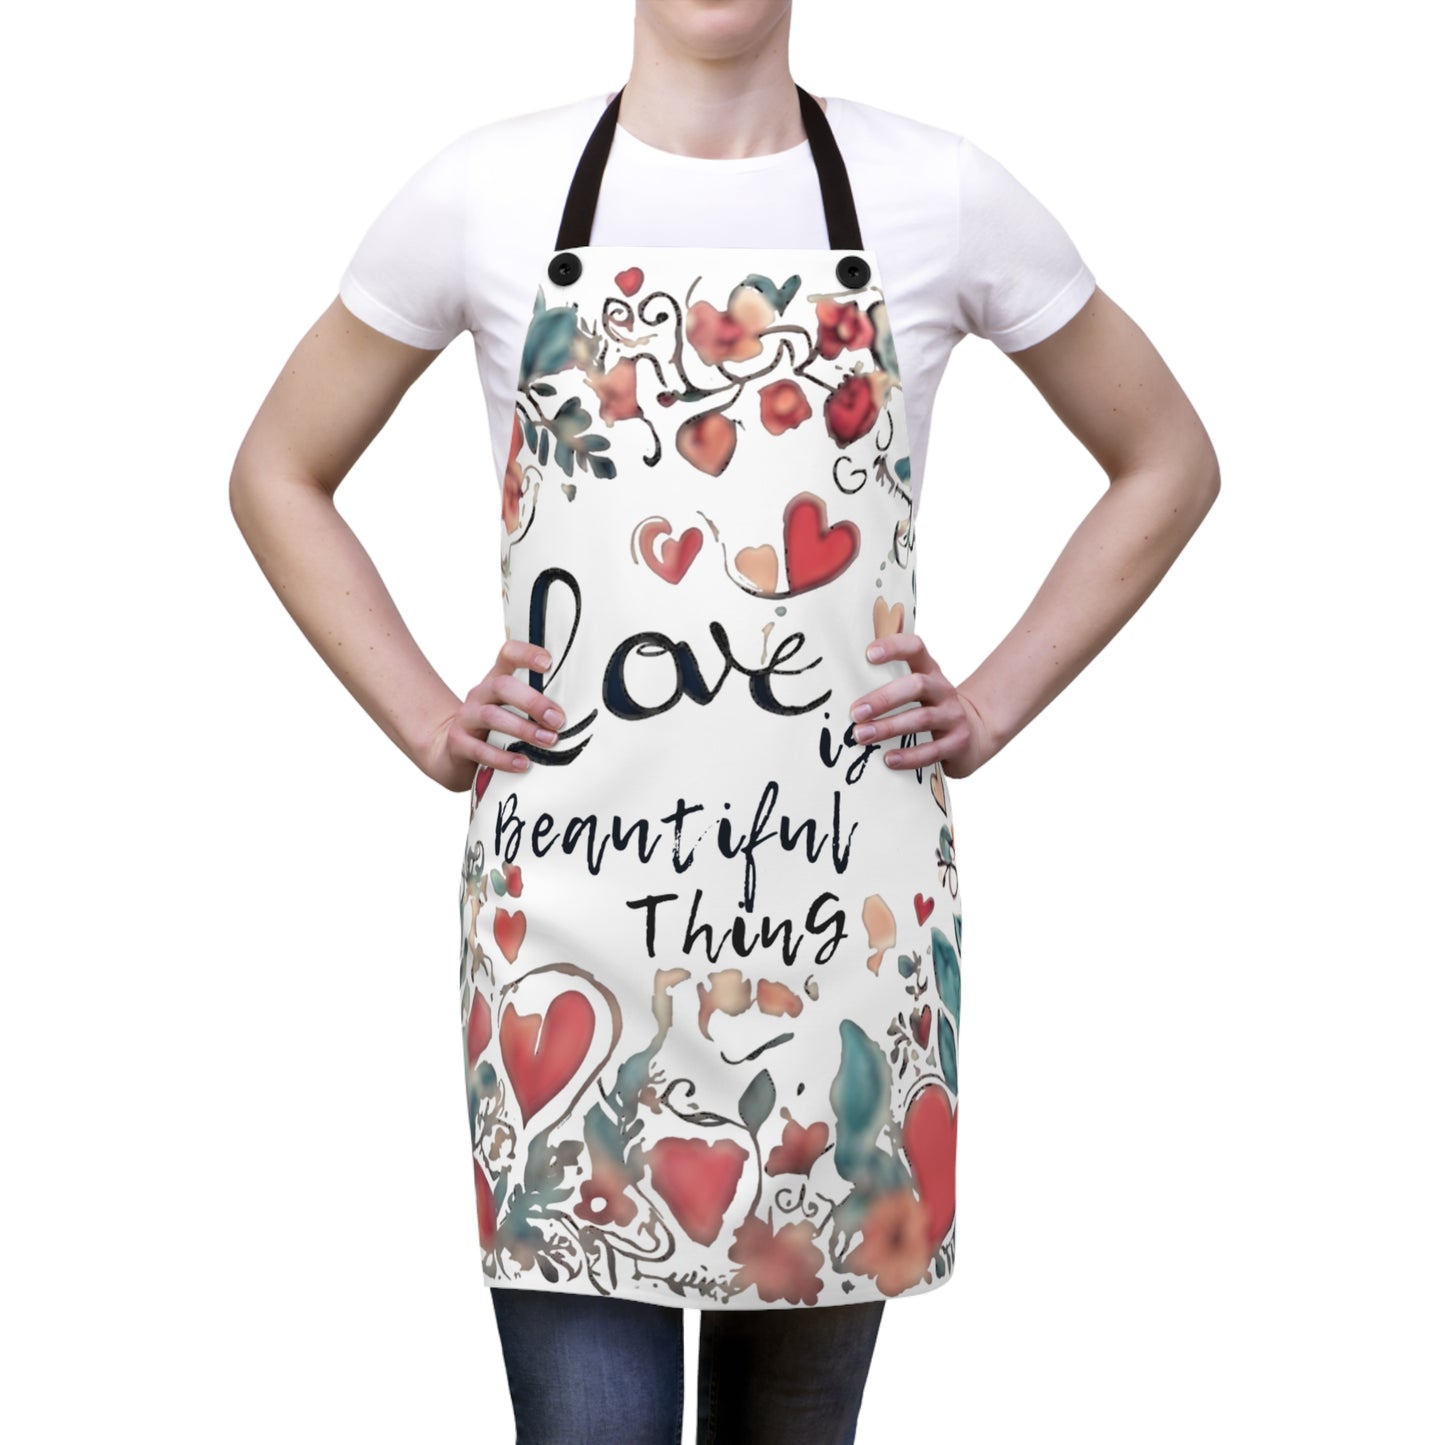 Love is a beautiful thing Apron, Artistic unique Apron great gift for the foodie in your life